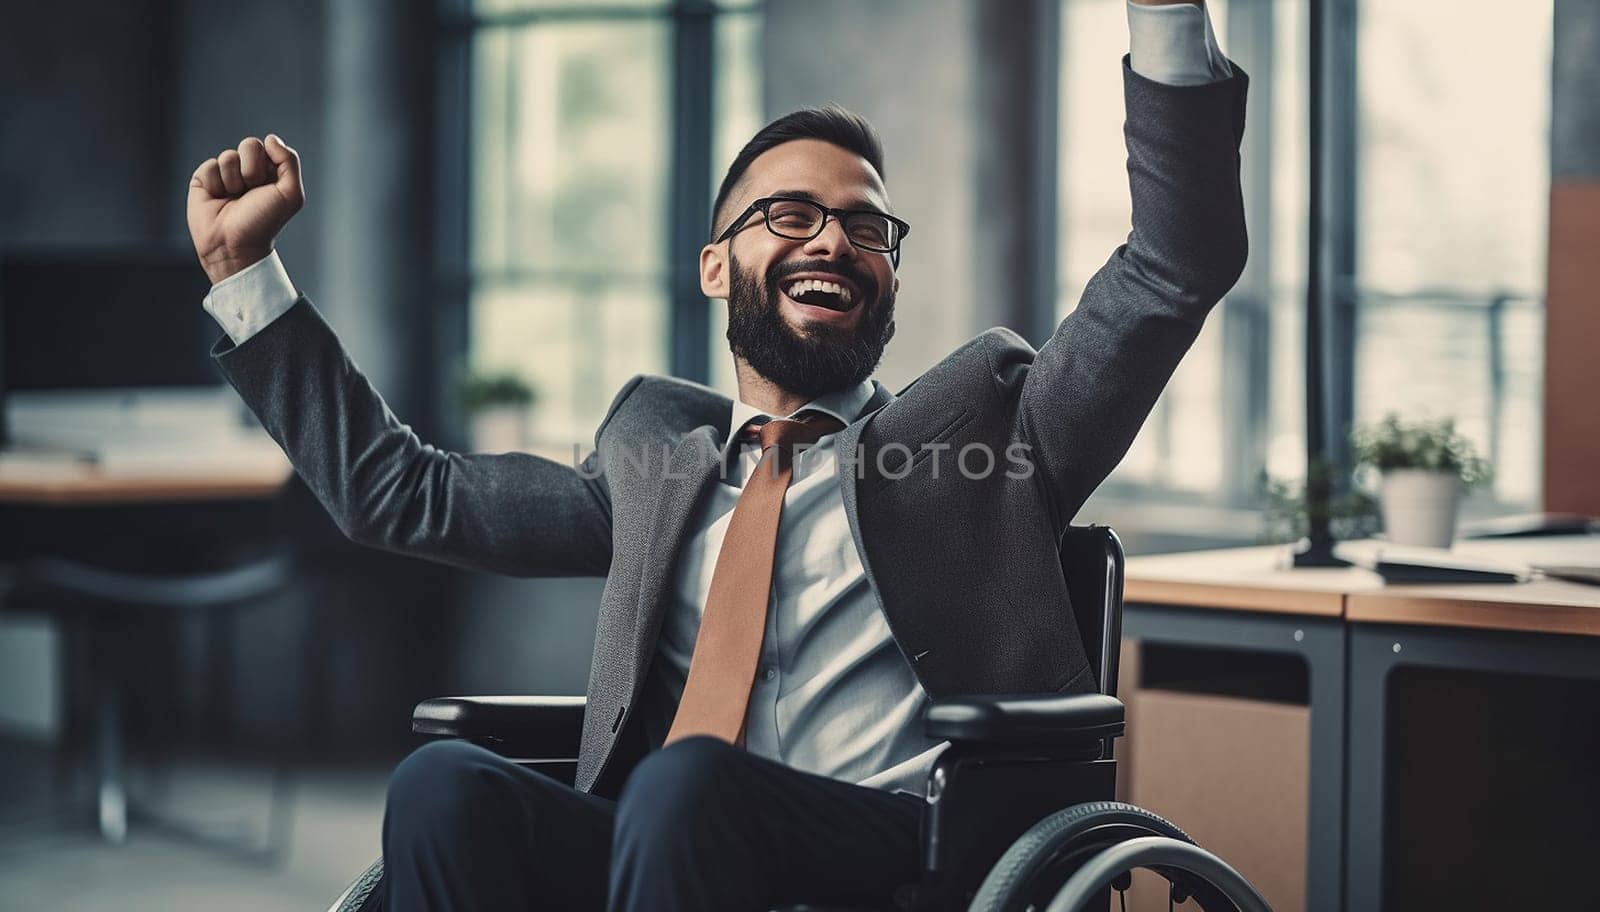 Portrait Of Young Happy successful Disabled business Man in Wheelchair wearing a business suit at the office. Cheering for victory and success modern